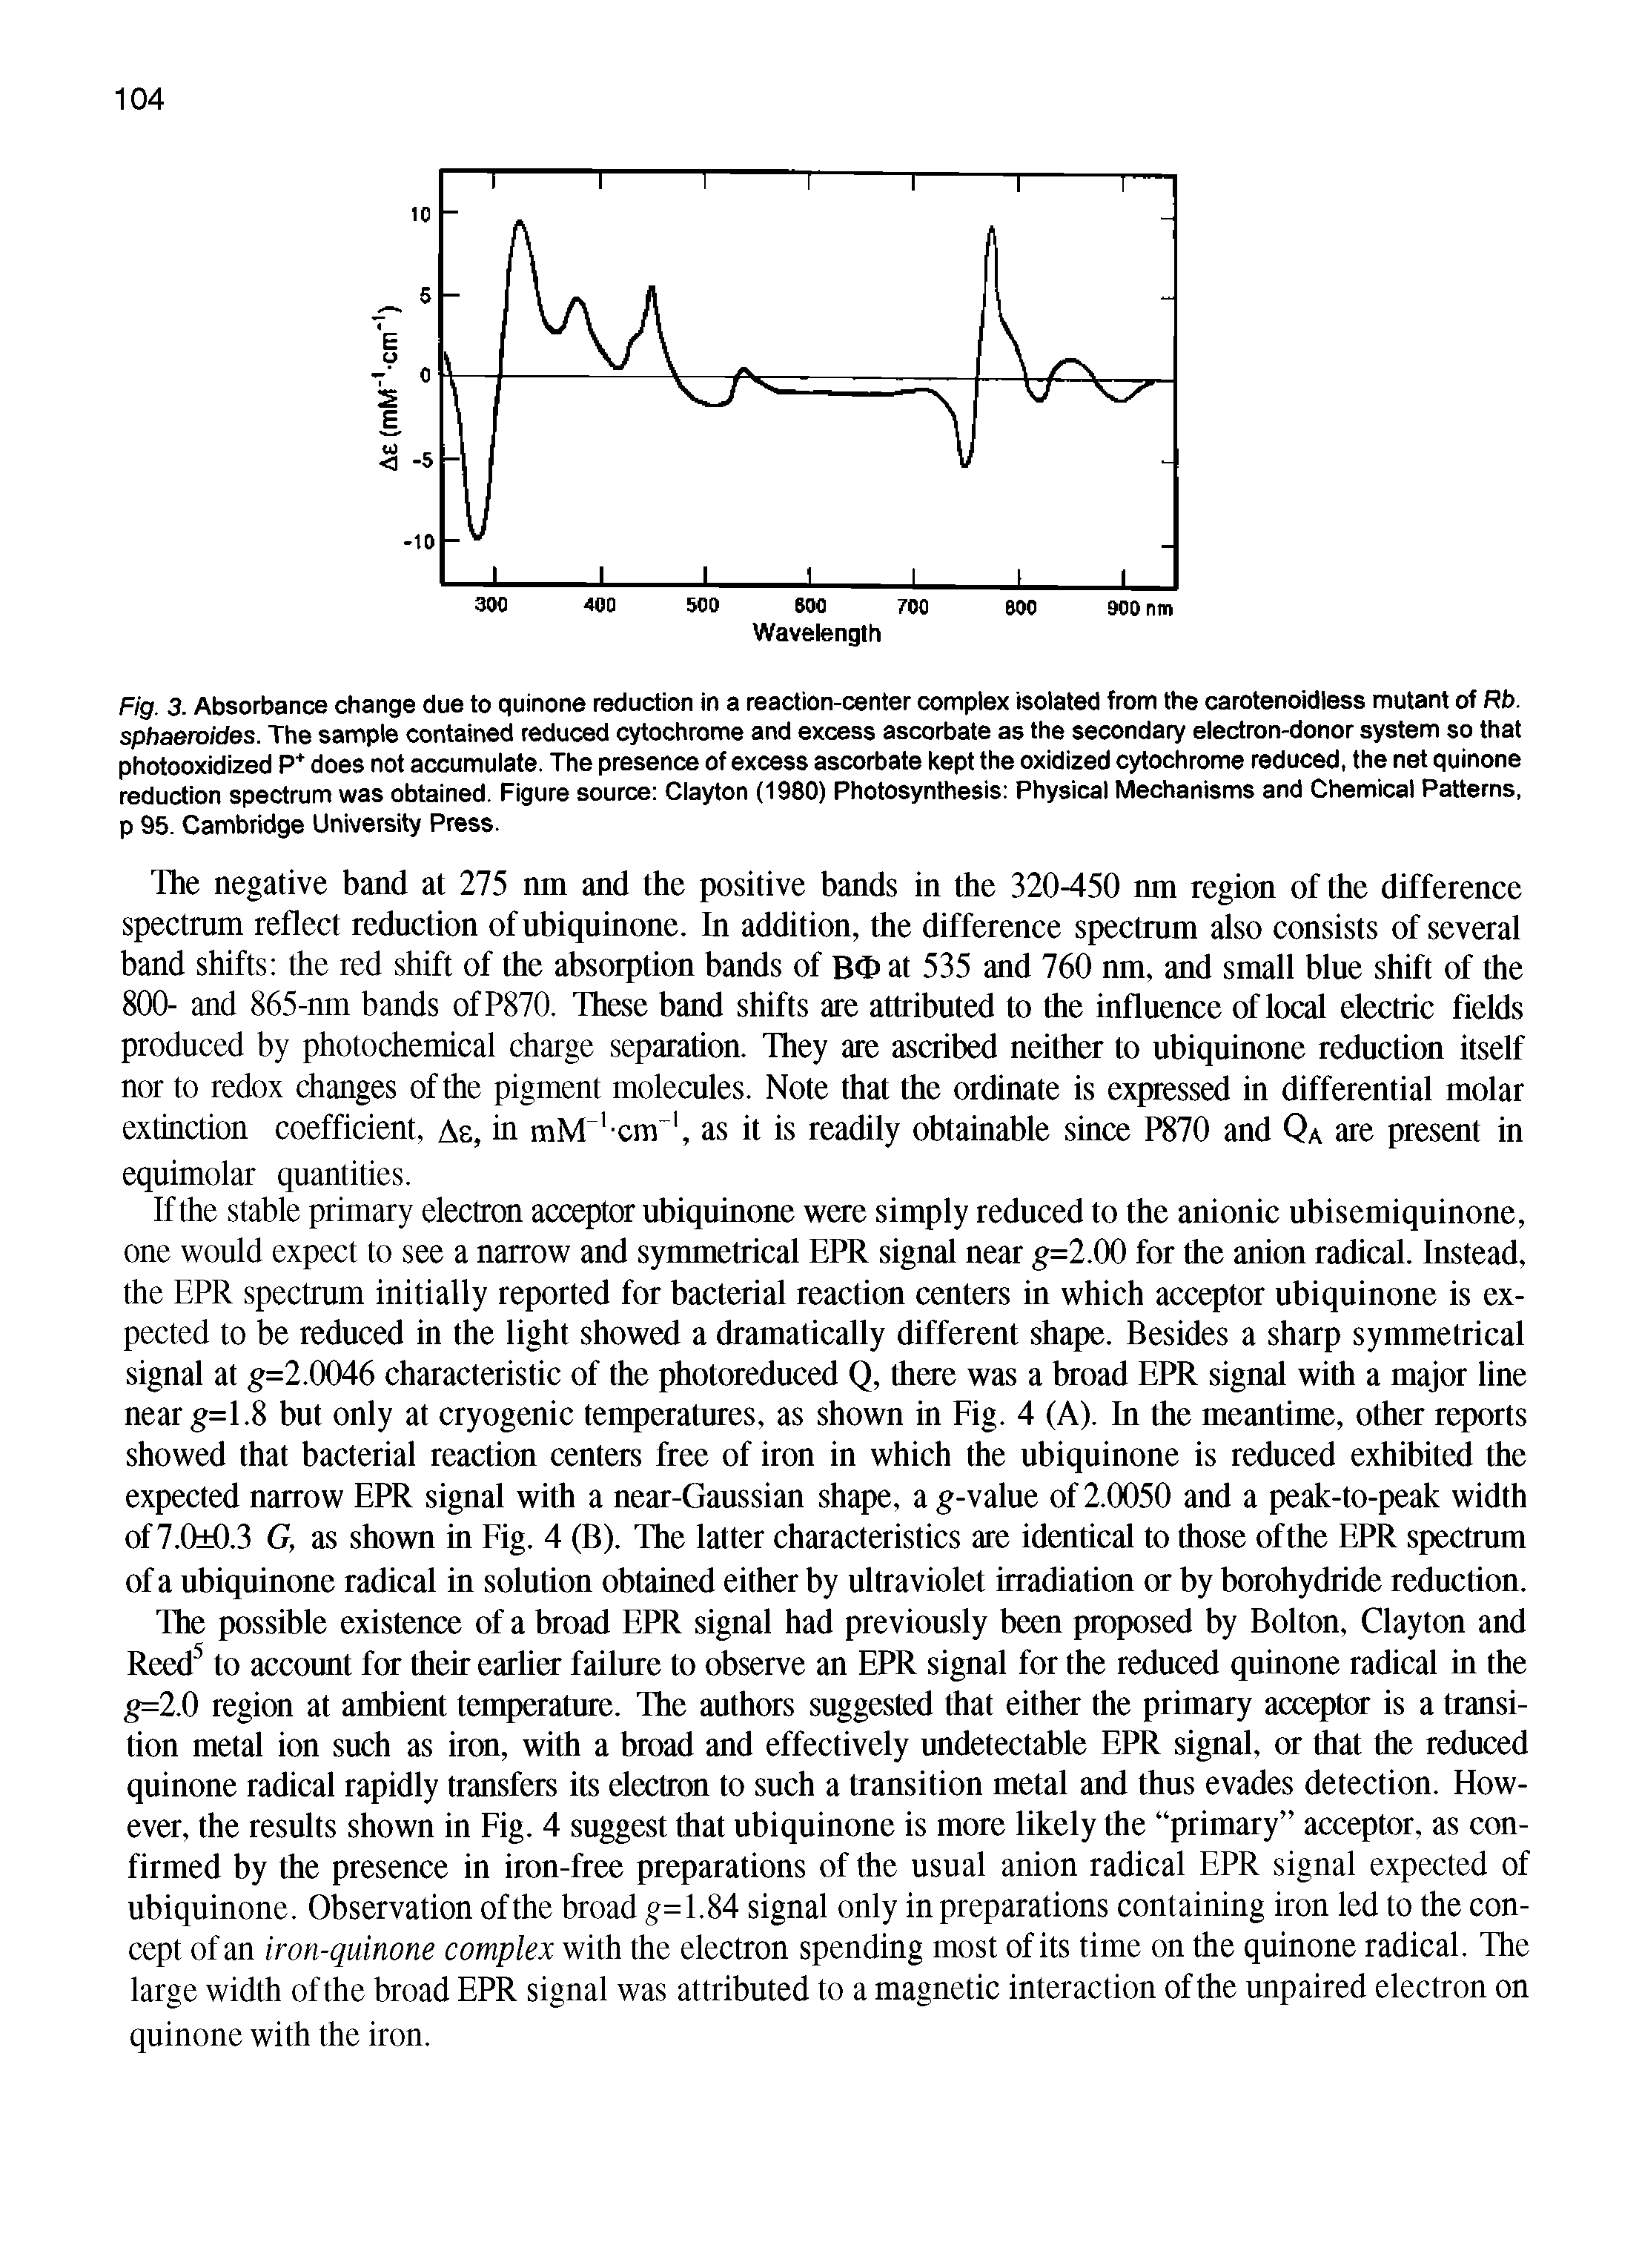 Fig. 3. Absorbance change due to quinone reduction in a reaction-center complex isolated from the carotenoidless mutant of Rb. sphaeroides. The sample contained reduced cytochrome and excess ascorbate as the secondary electron-donor system so that photooxidized P does not accumulate. The presence of excess ascorbate kept the oxidized cytochrome reduced, the net quinone reduction spectrum was obtained. Figure source Clayton (1980) Photosynthesis Physical Mechanisms and Chemical Patterns, p 95. Cambridge University Press.